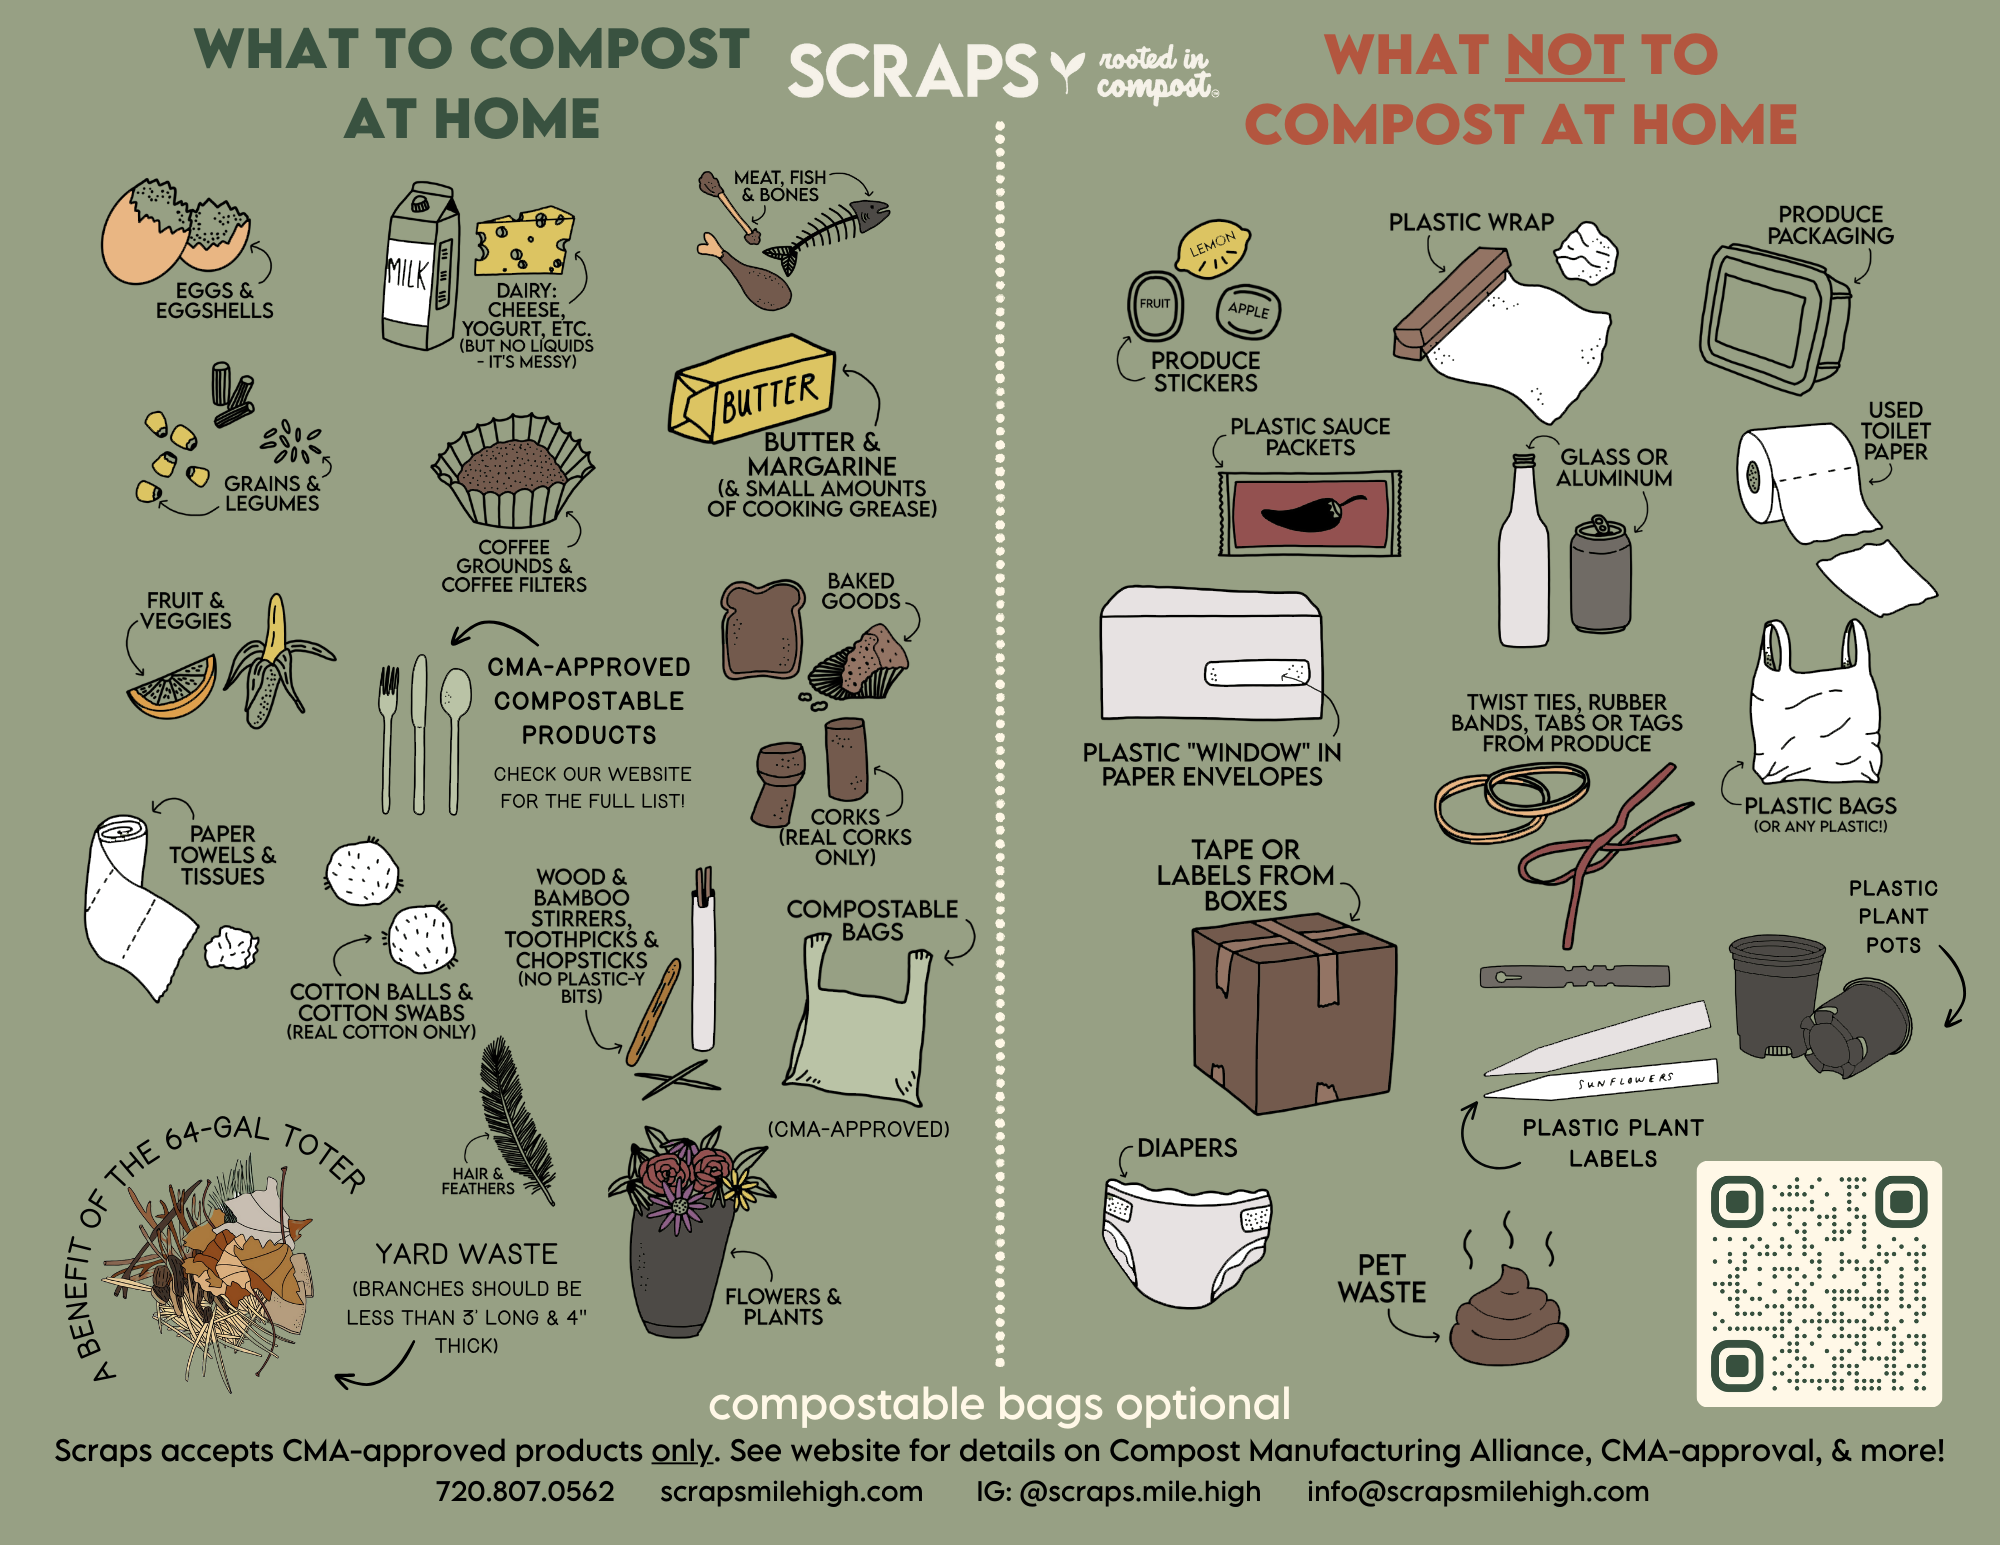 What can you compost with Scraps?